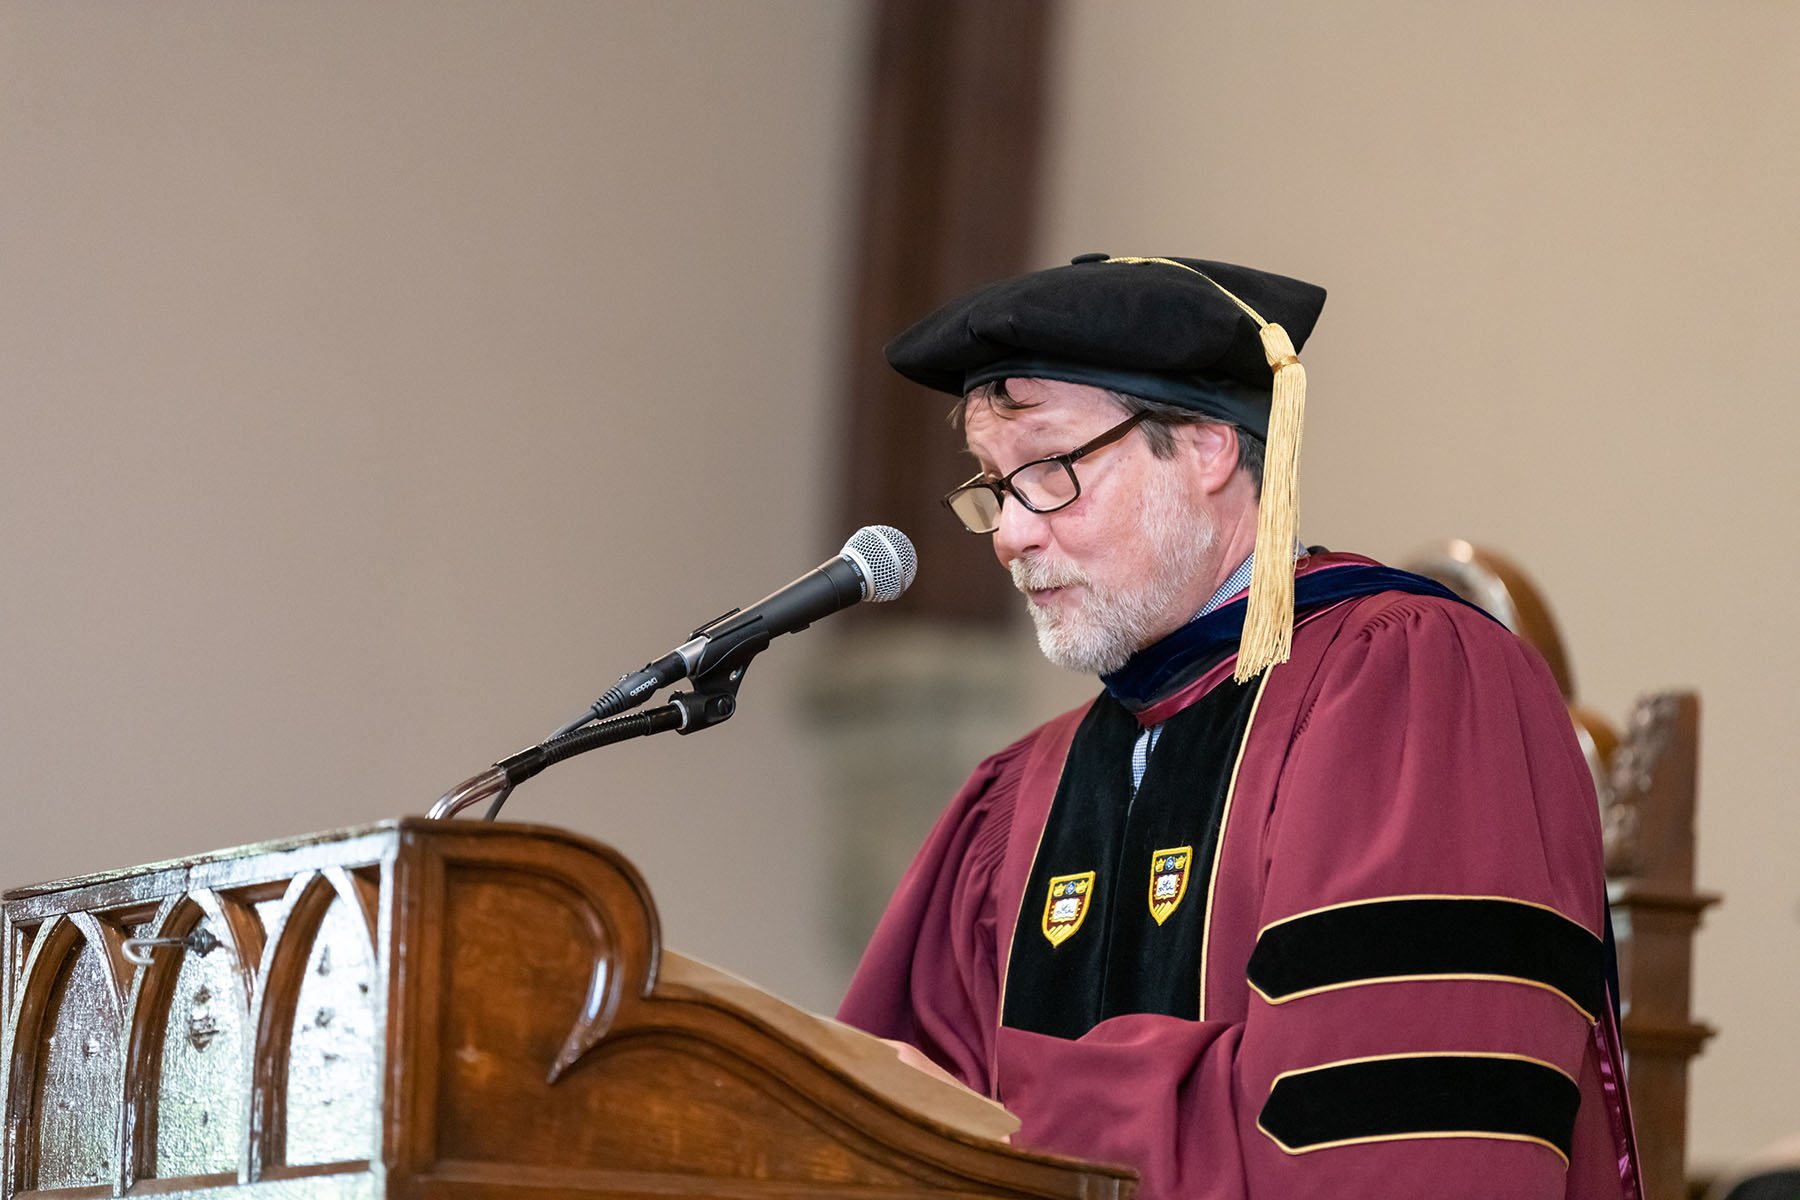 William Hoynes, Dean of the Faculty, speaks at a podium. Hoynes is wearing a burgundy robe and a dark cap with a gold tassel.